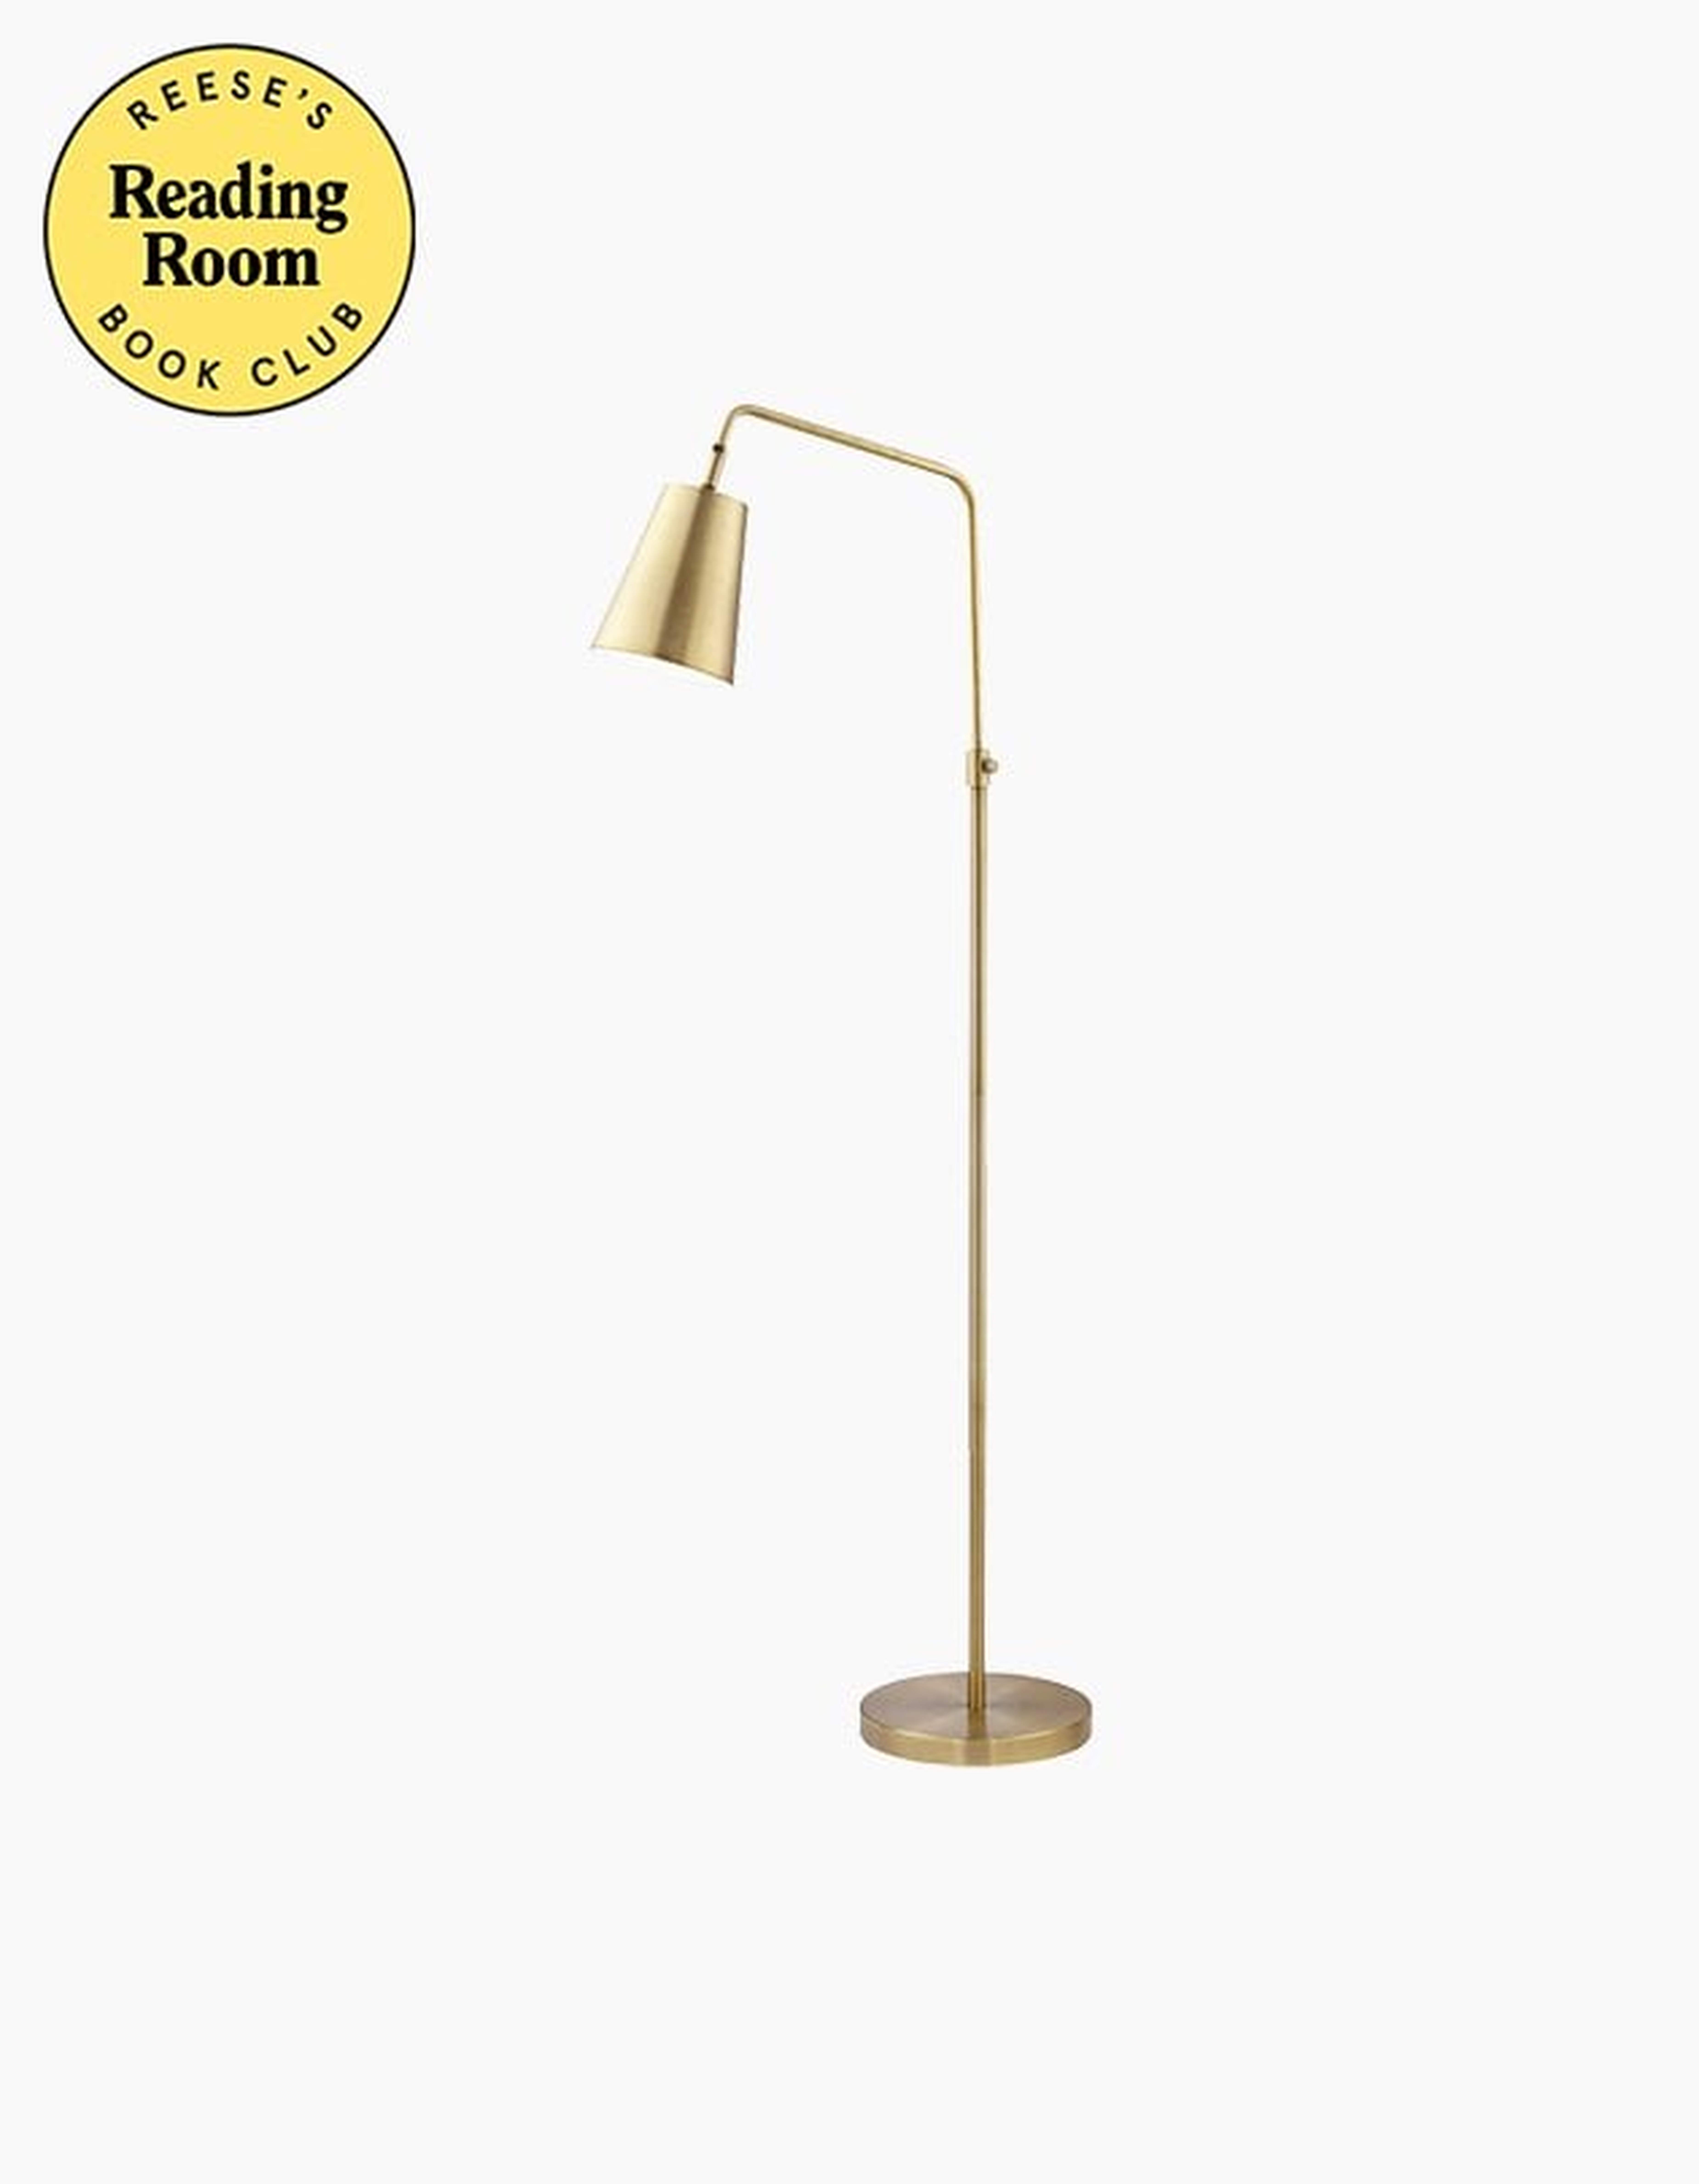 Annotate Floor Lamp - Reese's Book Club x Havenly